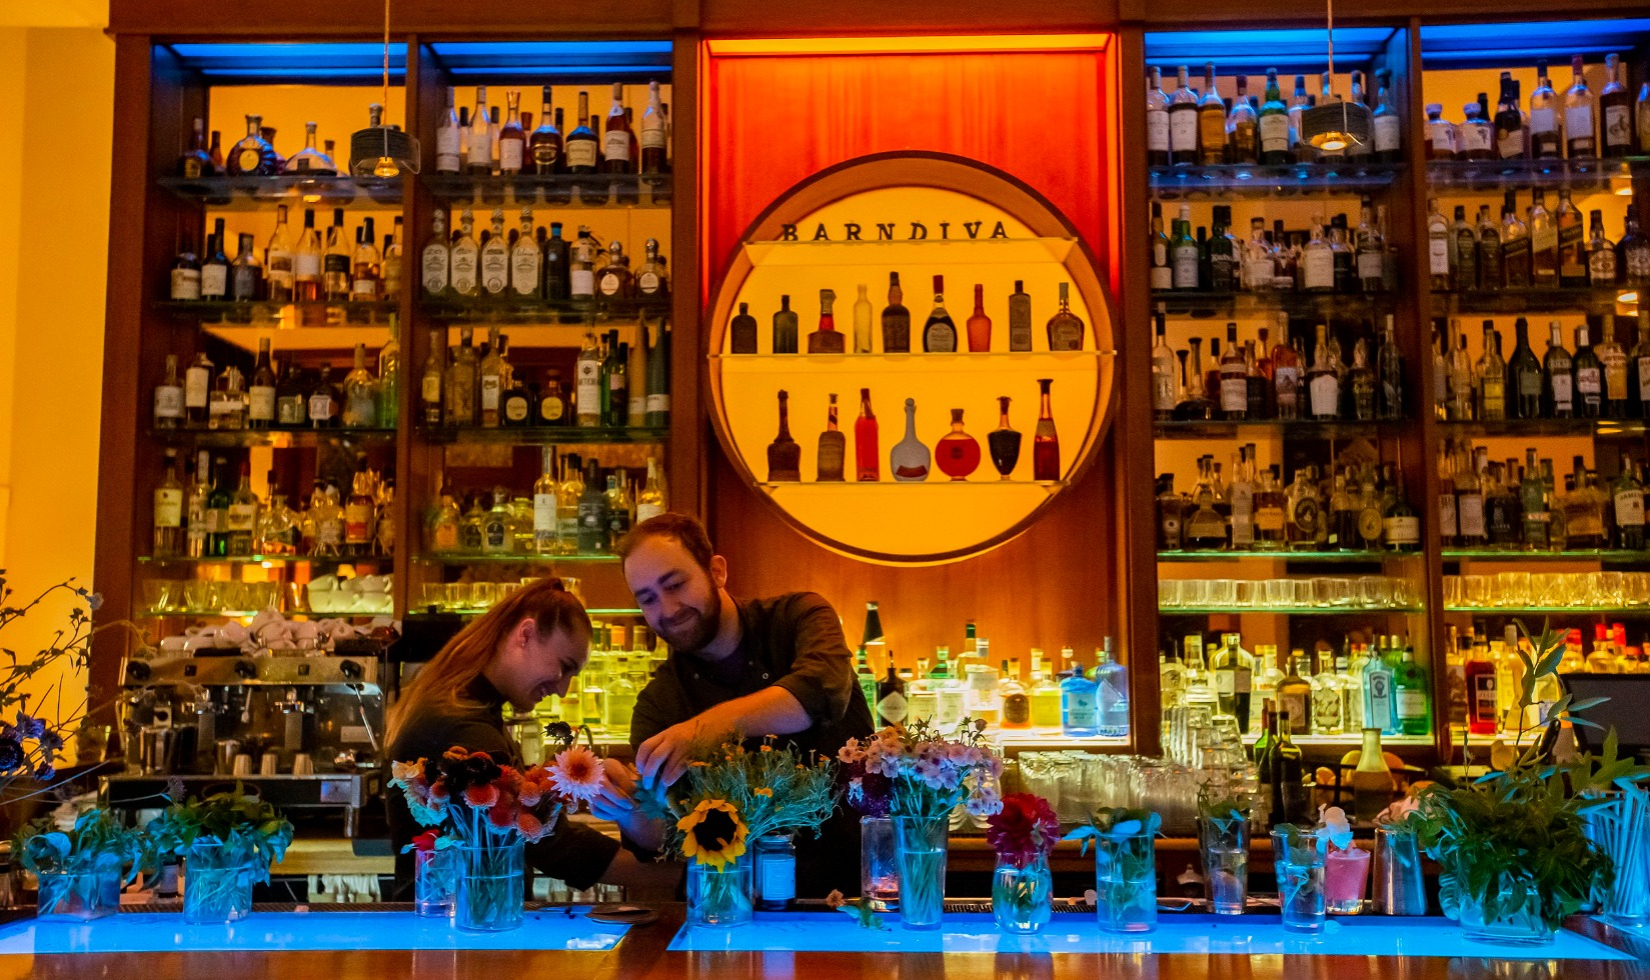 Bartenders mixing drinks in front of bar back-lit by blue lights with shelves lined with spirits bottles